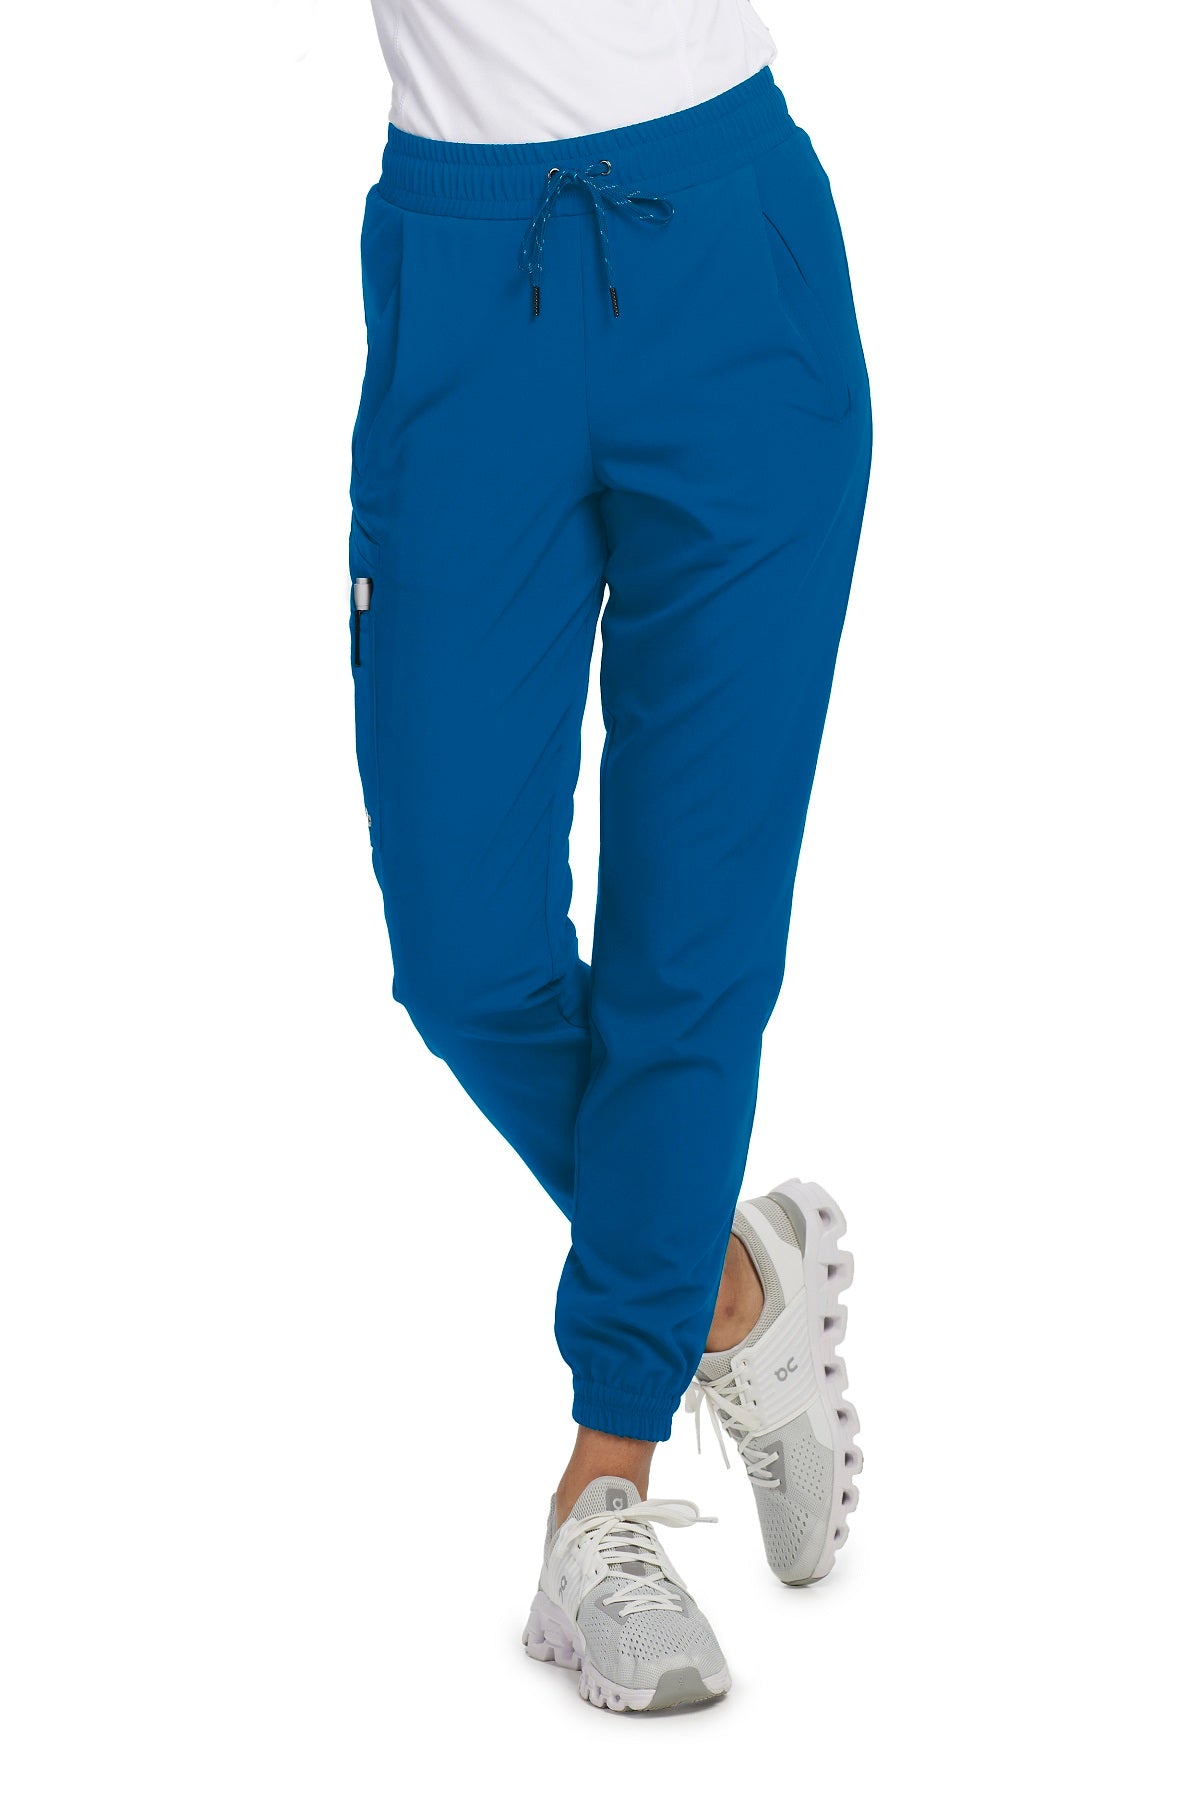 Barco Unify Scrub Pants Mission Jogger Regular Length in New Royal at Parker's Clothing and Shoes.